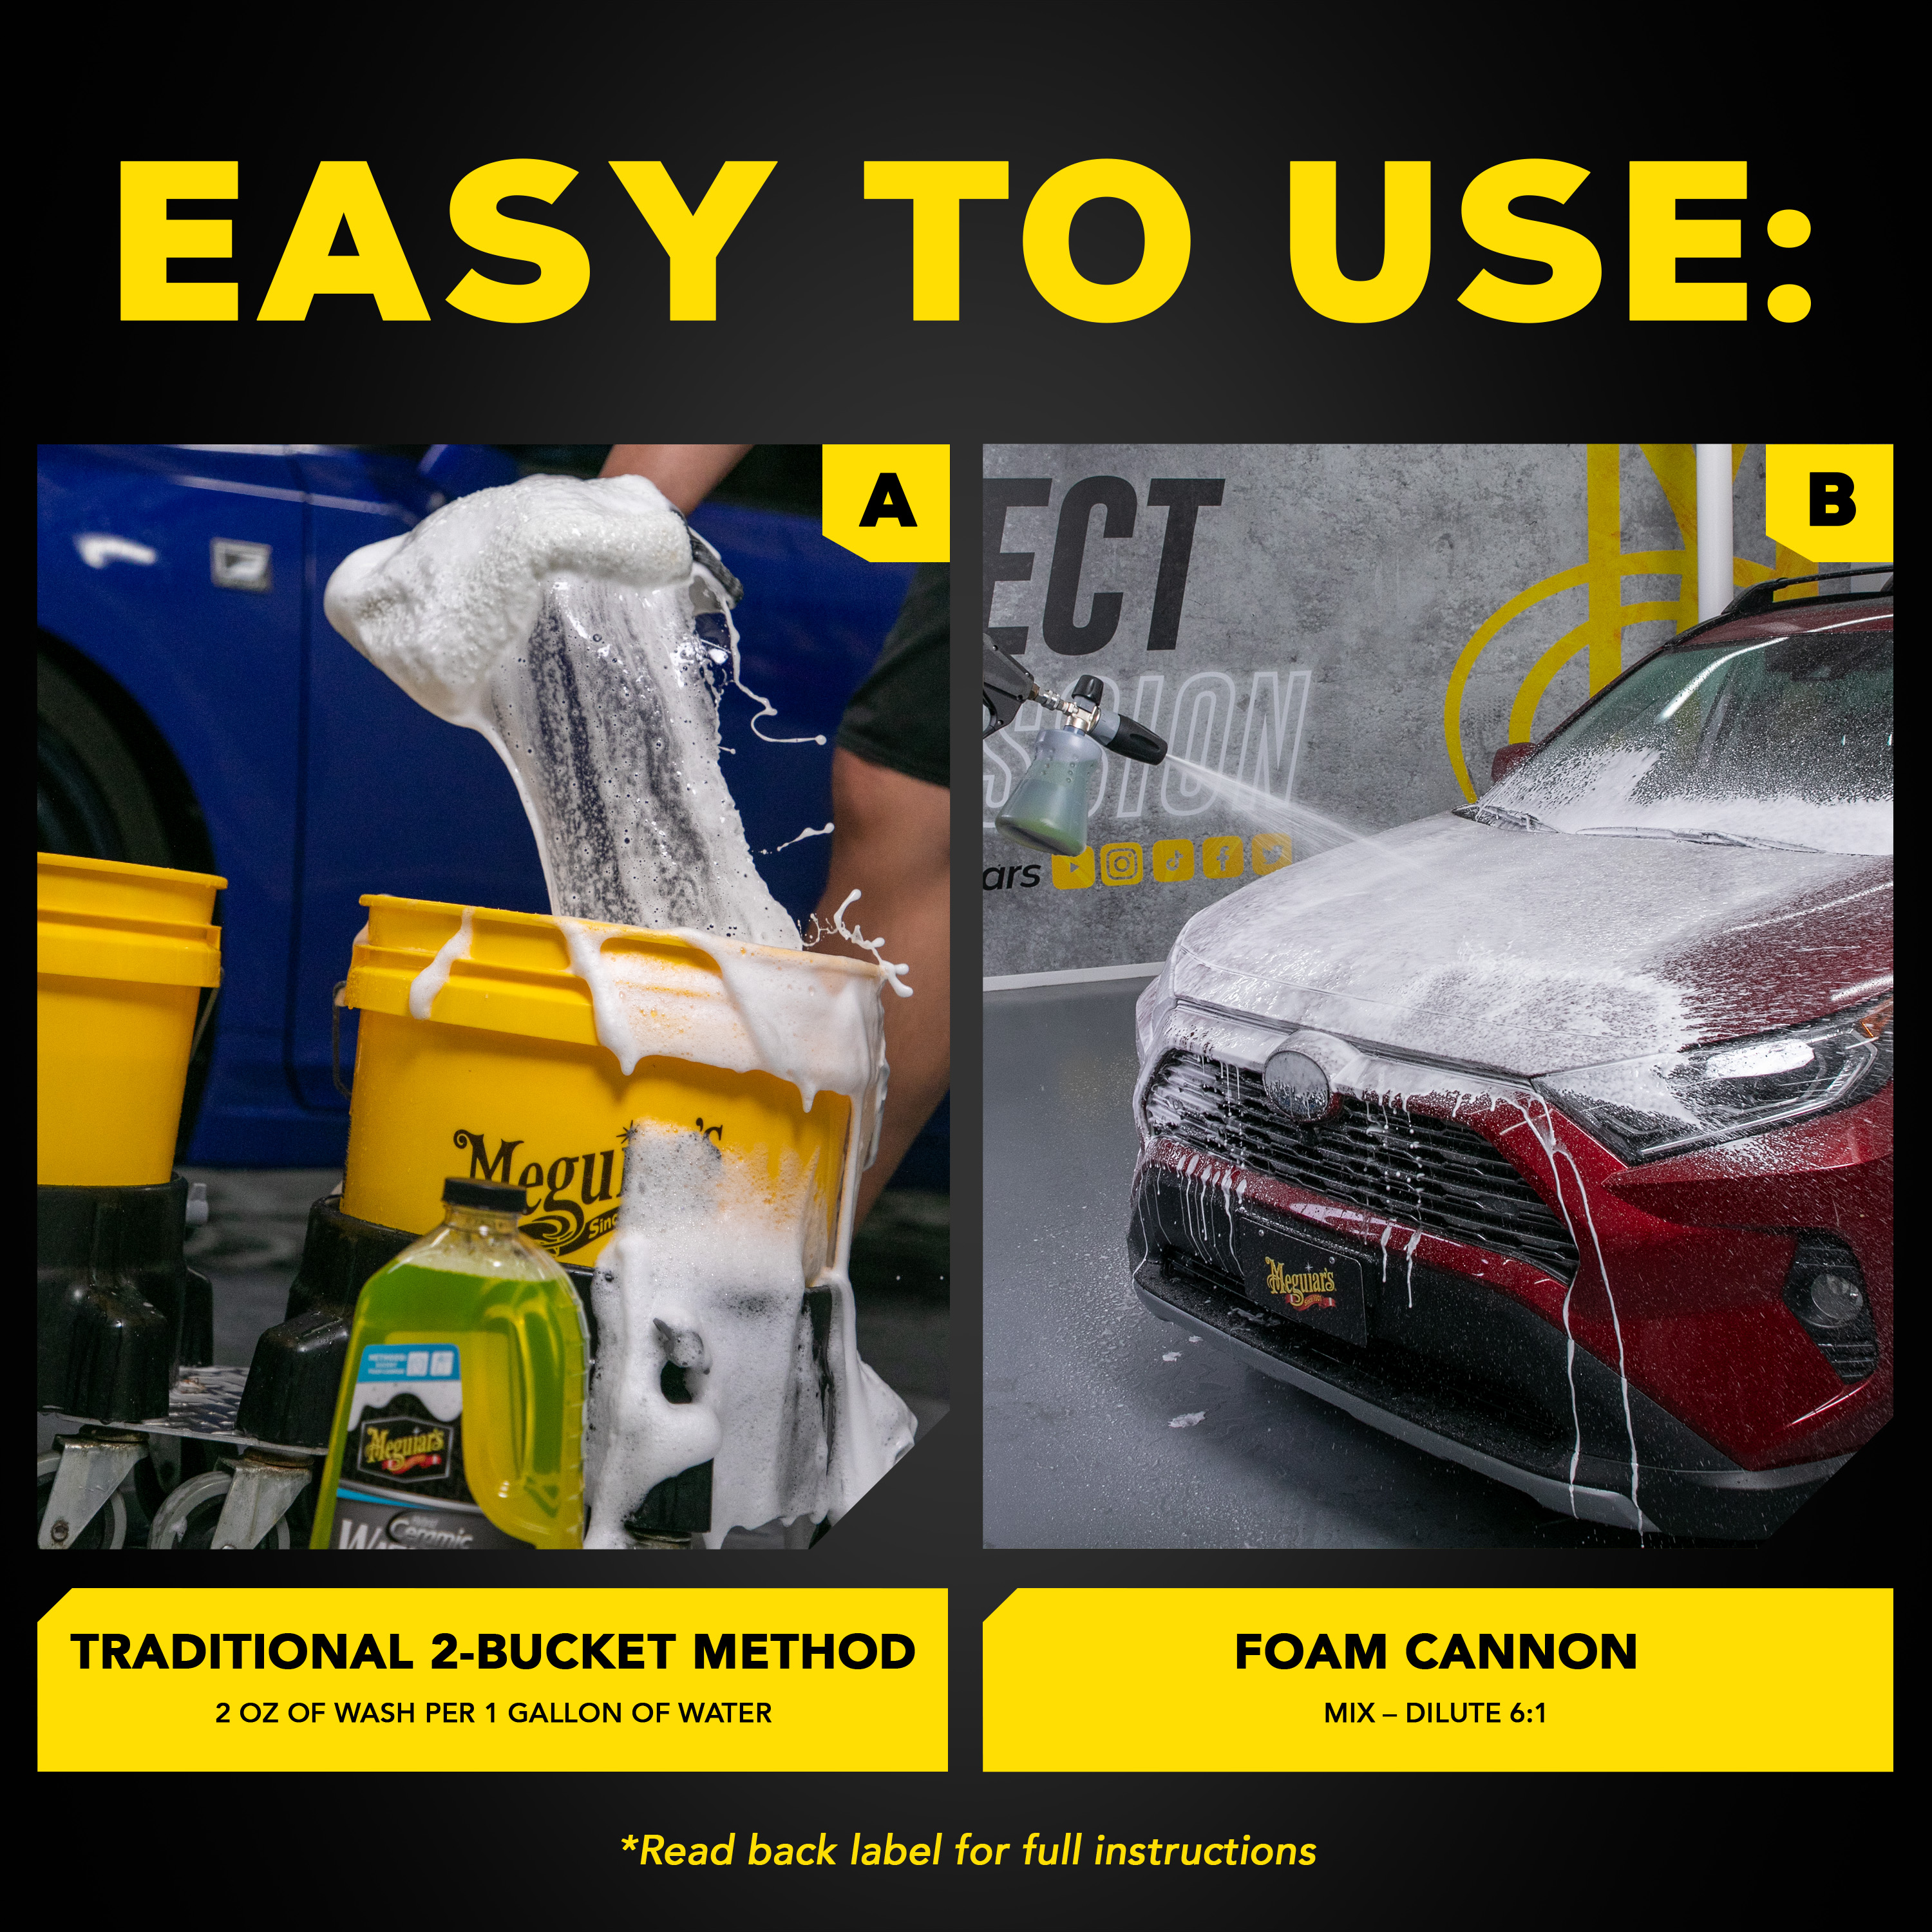 Meguiar's - Clean - Prep, Water bead - Protect, Restore - Revive! Ceramic  Made Easy! #FindYourPassion #ReflectYourPassion #meguiars